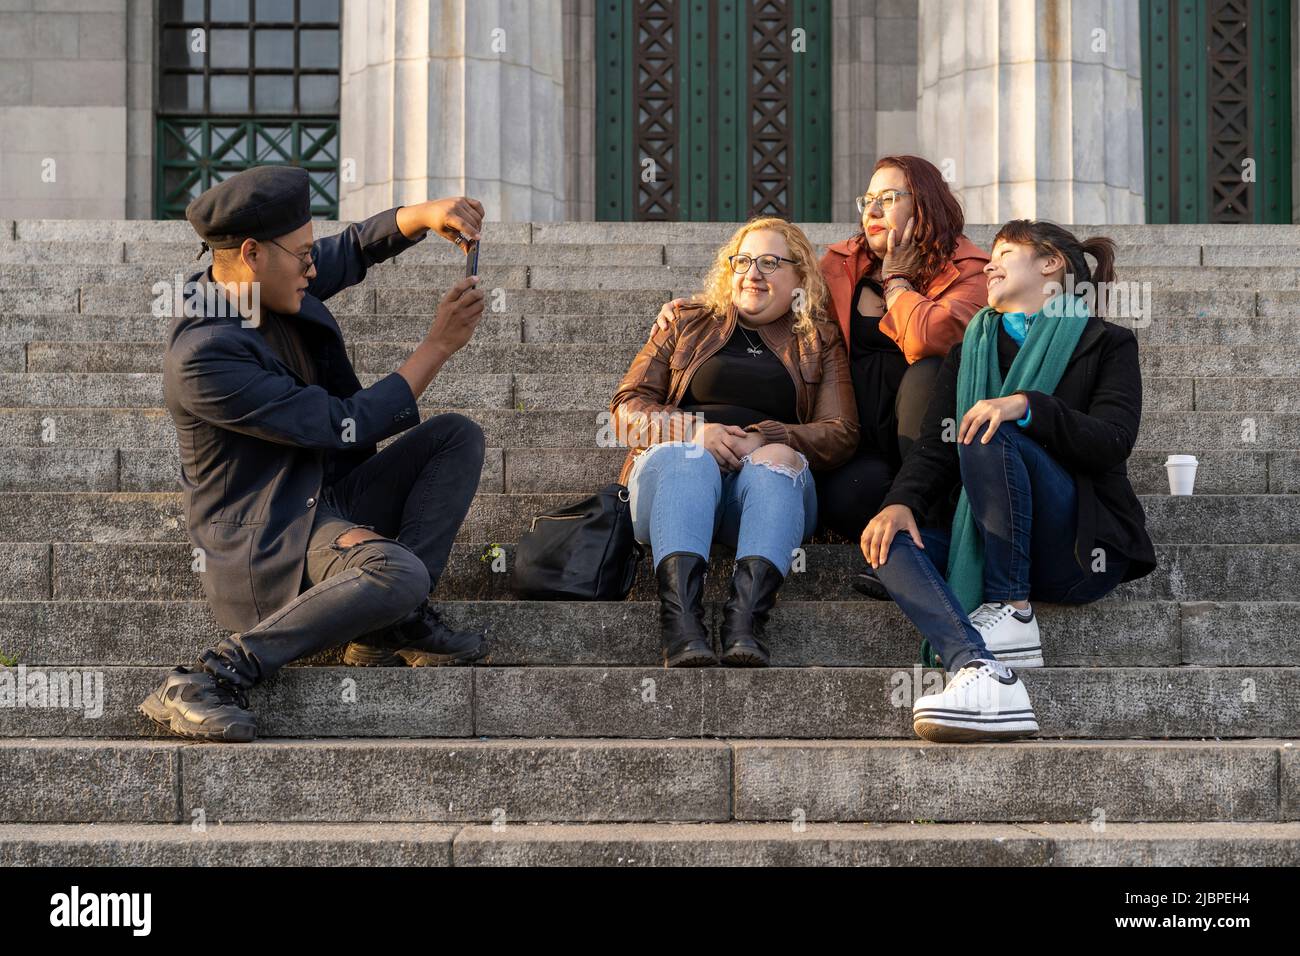 Multi ethnic group of friends sitting on some stairs having a good time chatting, laughing and taking photos Stock Photo